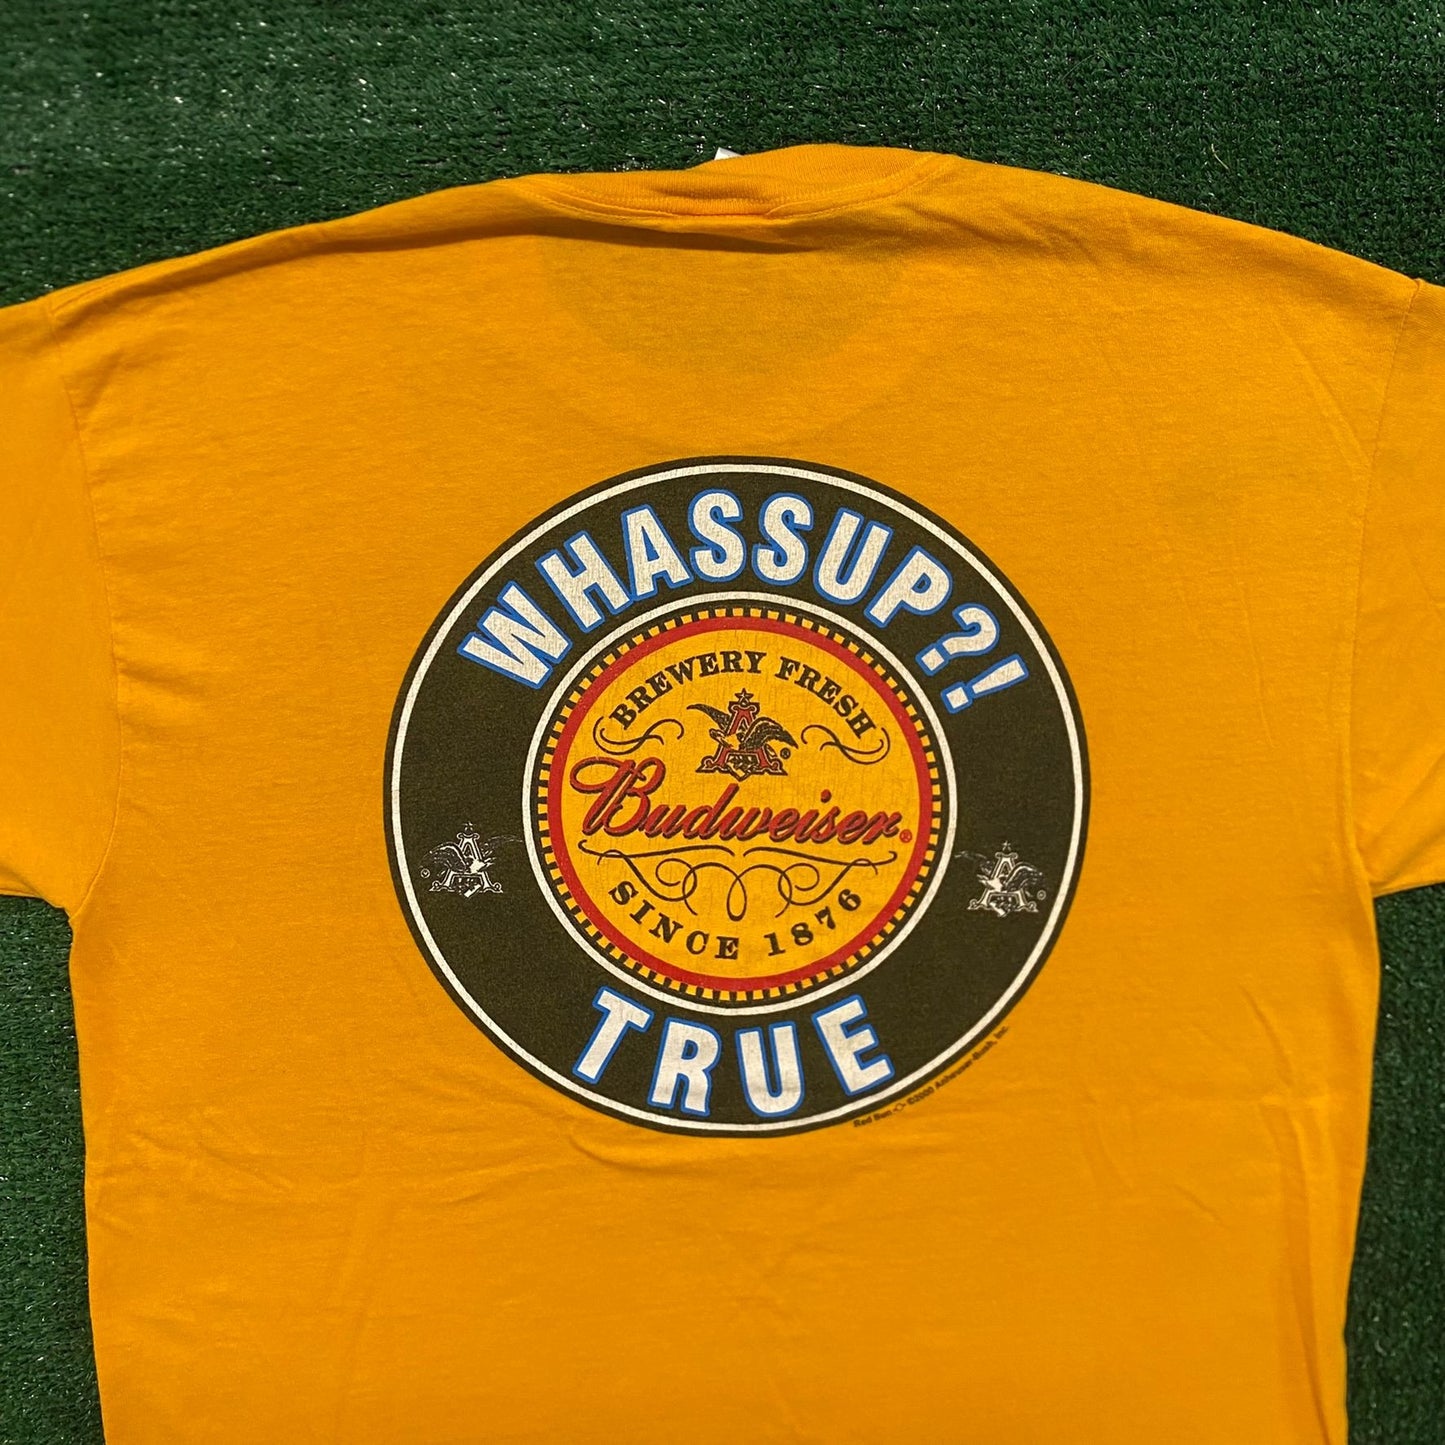 Budweiser Whassup? Vintage 90s Beer Drunk T-Shirt